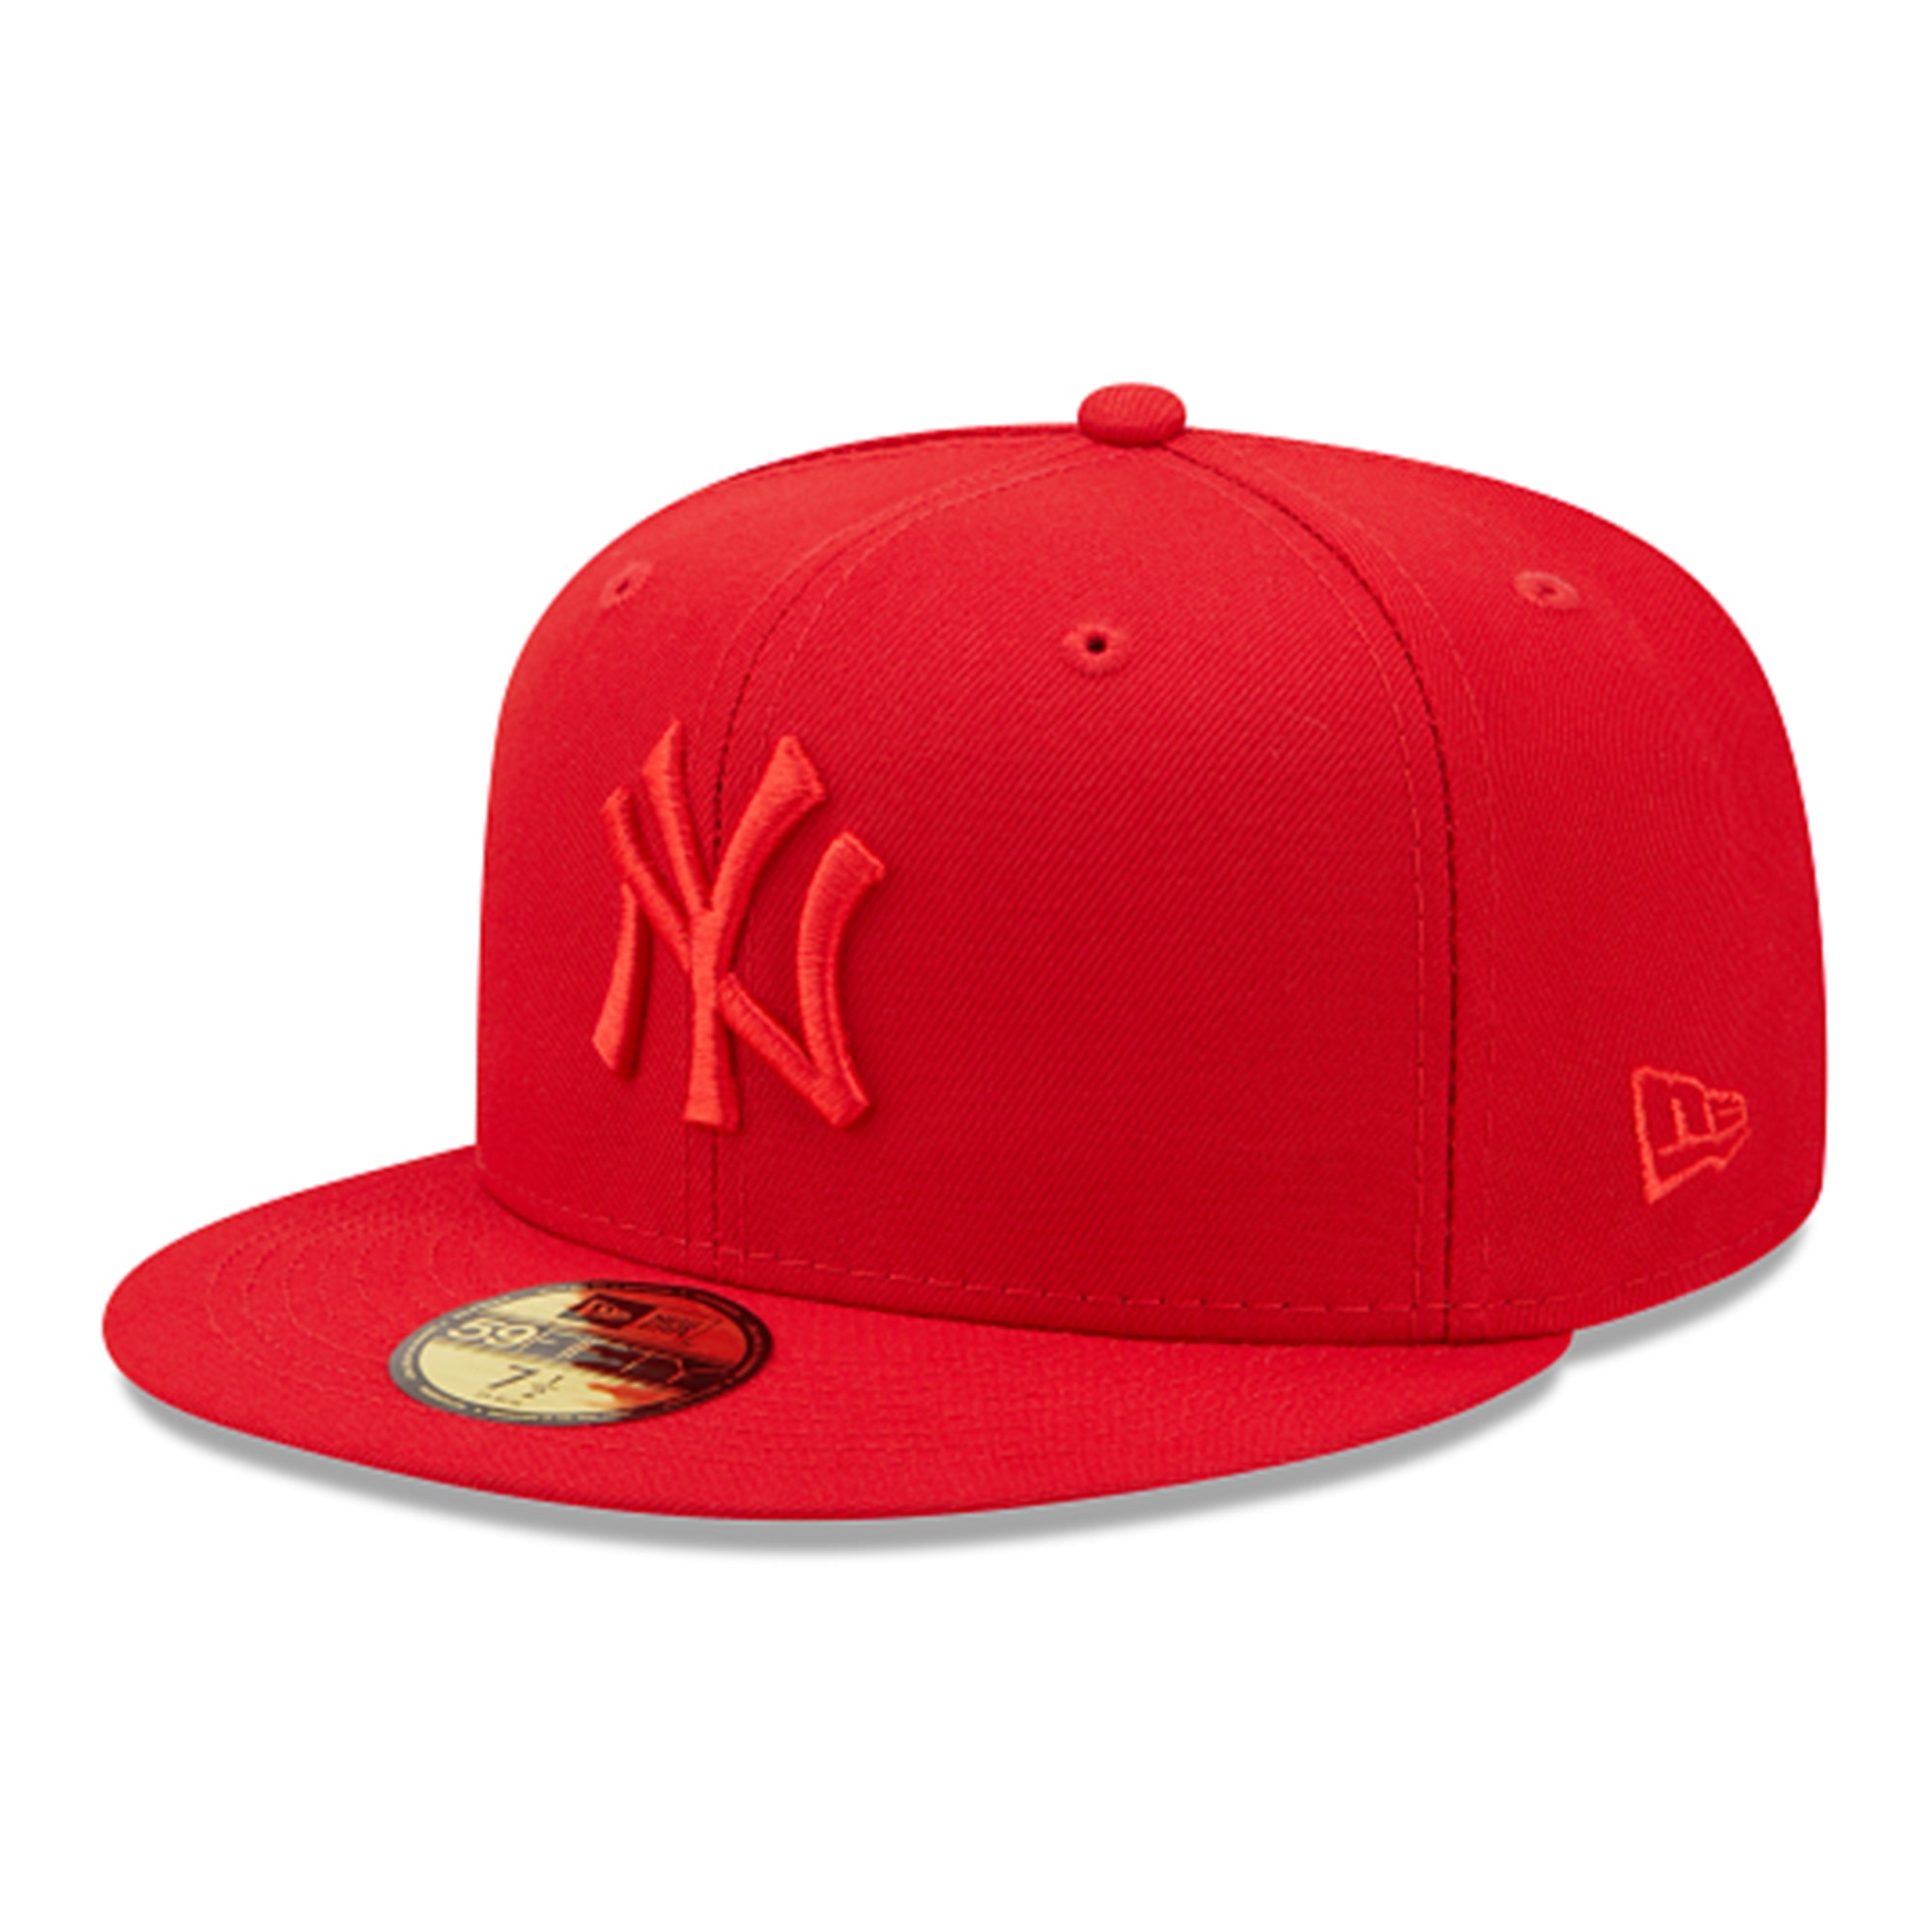 New Era New York Yankees Fitted Hat (Red)1